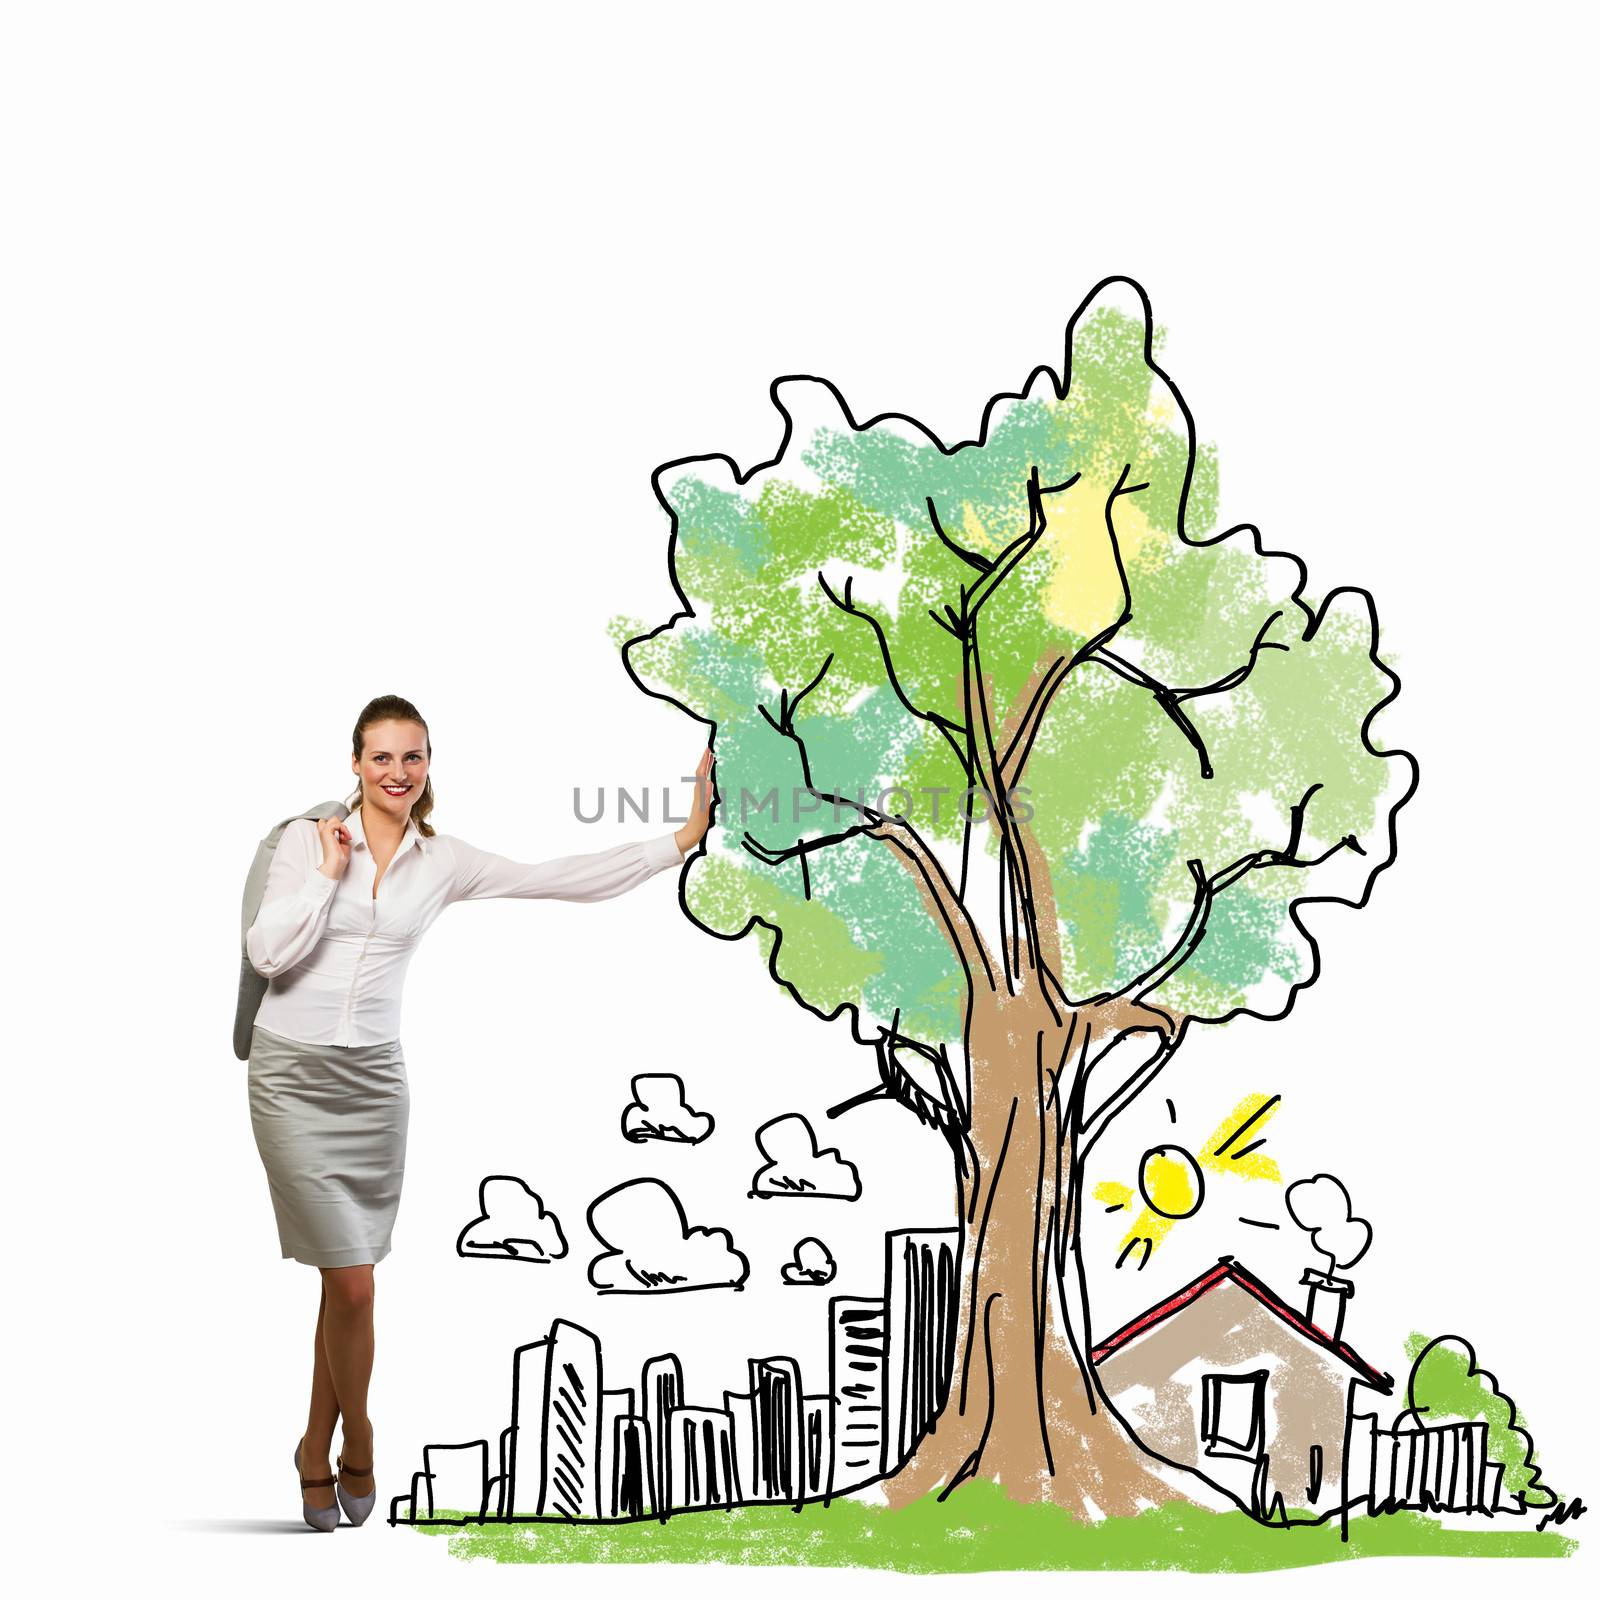 Image of businesswoman leaning on illustration. Construction concept